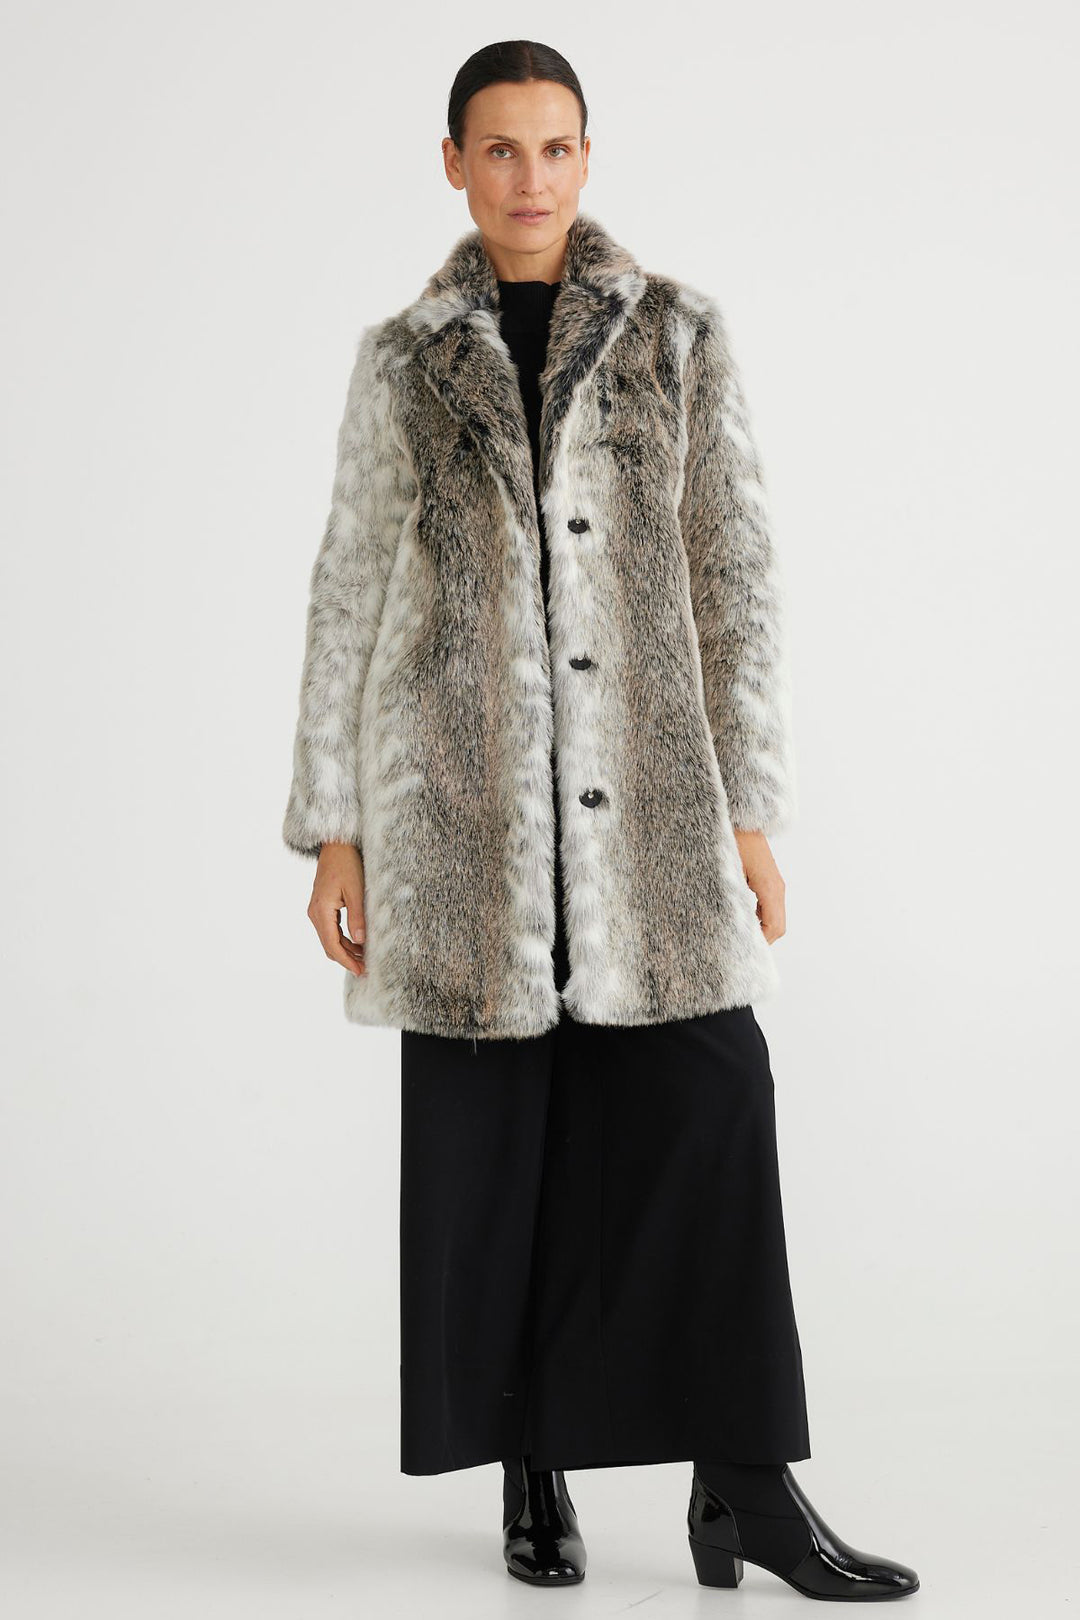 Brand Brave & True  Style BT6766-2 Colour Fawn 100% Polyester  The perfect mid length jacket  Faux Fur  Snap covered buttons for closure Pockets  Fully Lined 